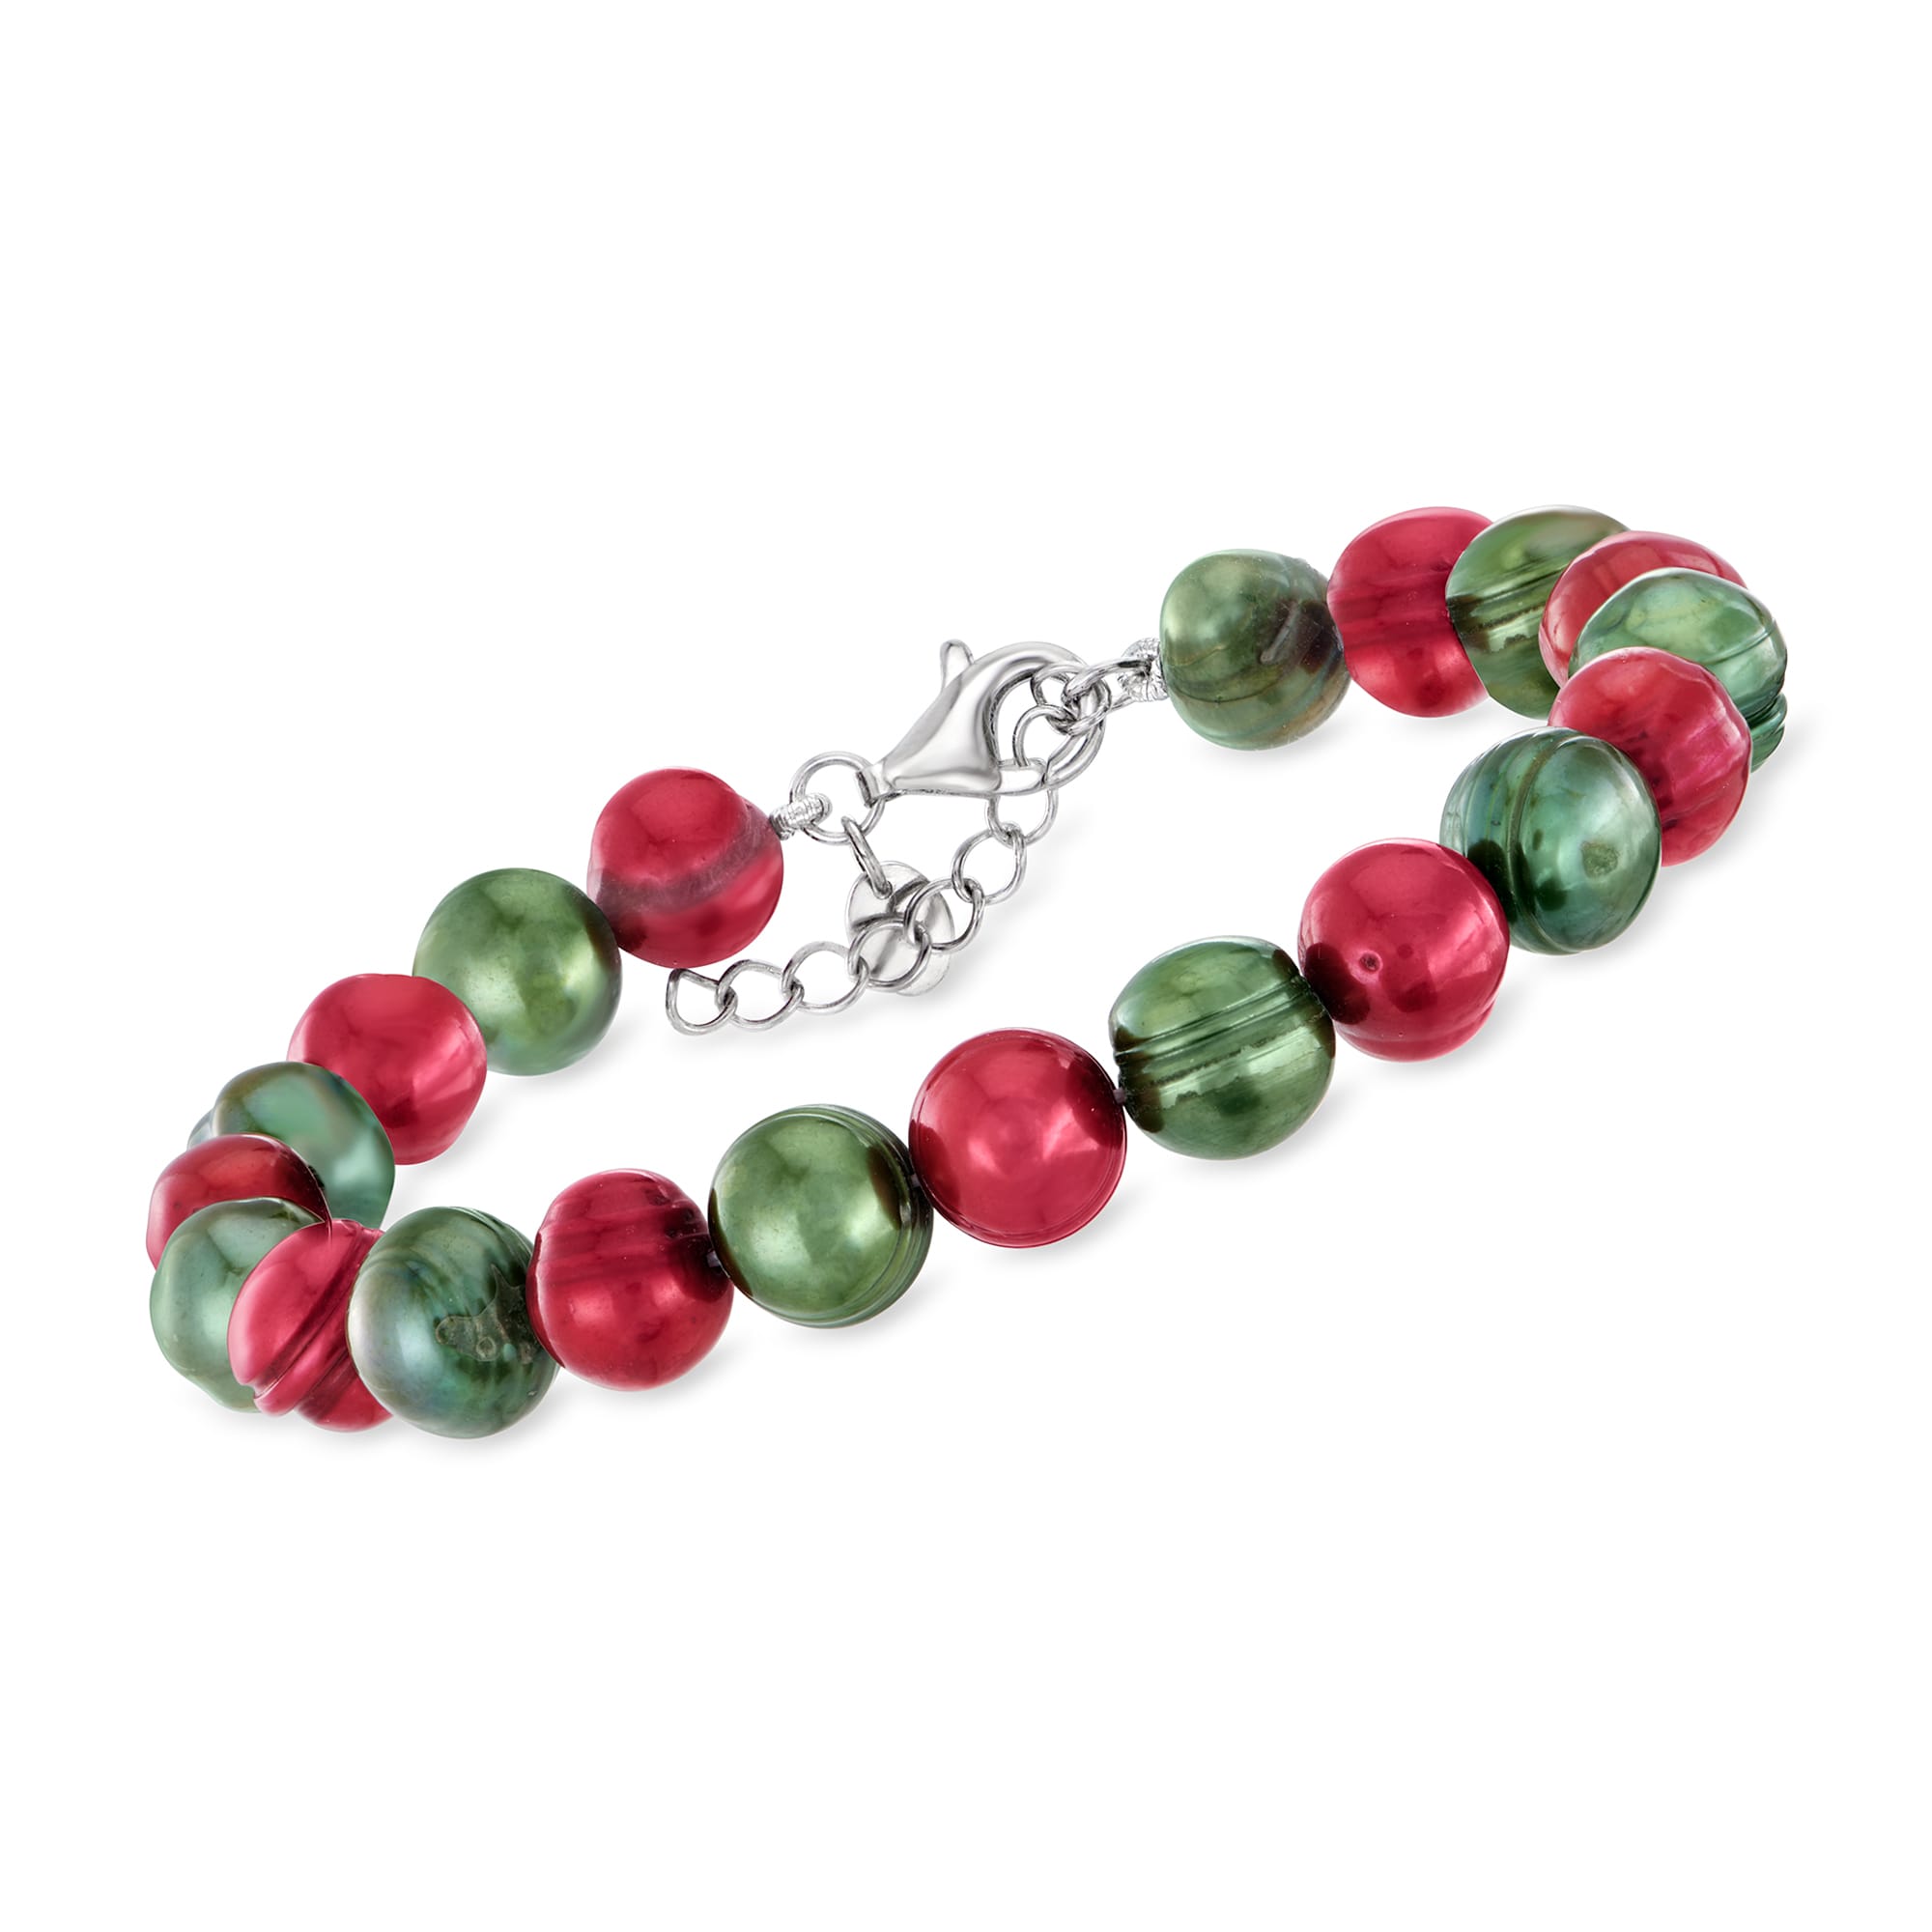 8-9mm Multicolored Cultured Pearl Jewelry Set: Necklace and Bracelet in  Sterling Silver. 18\